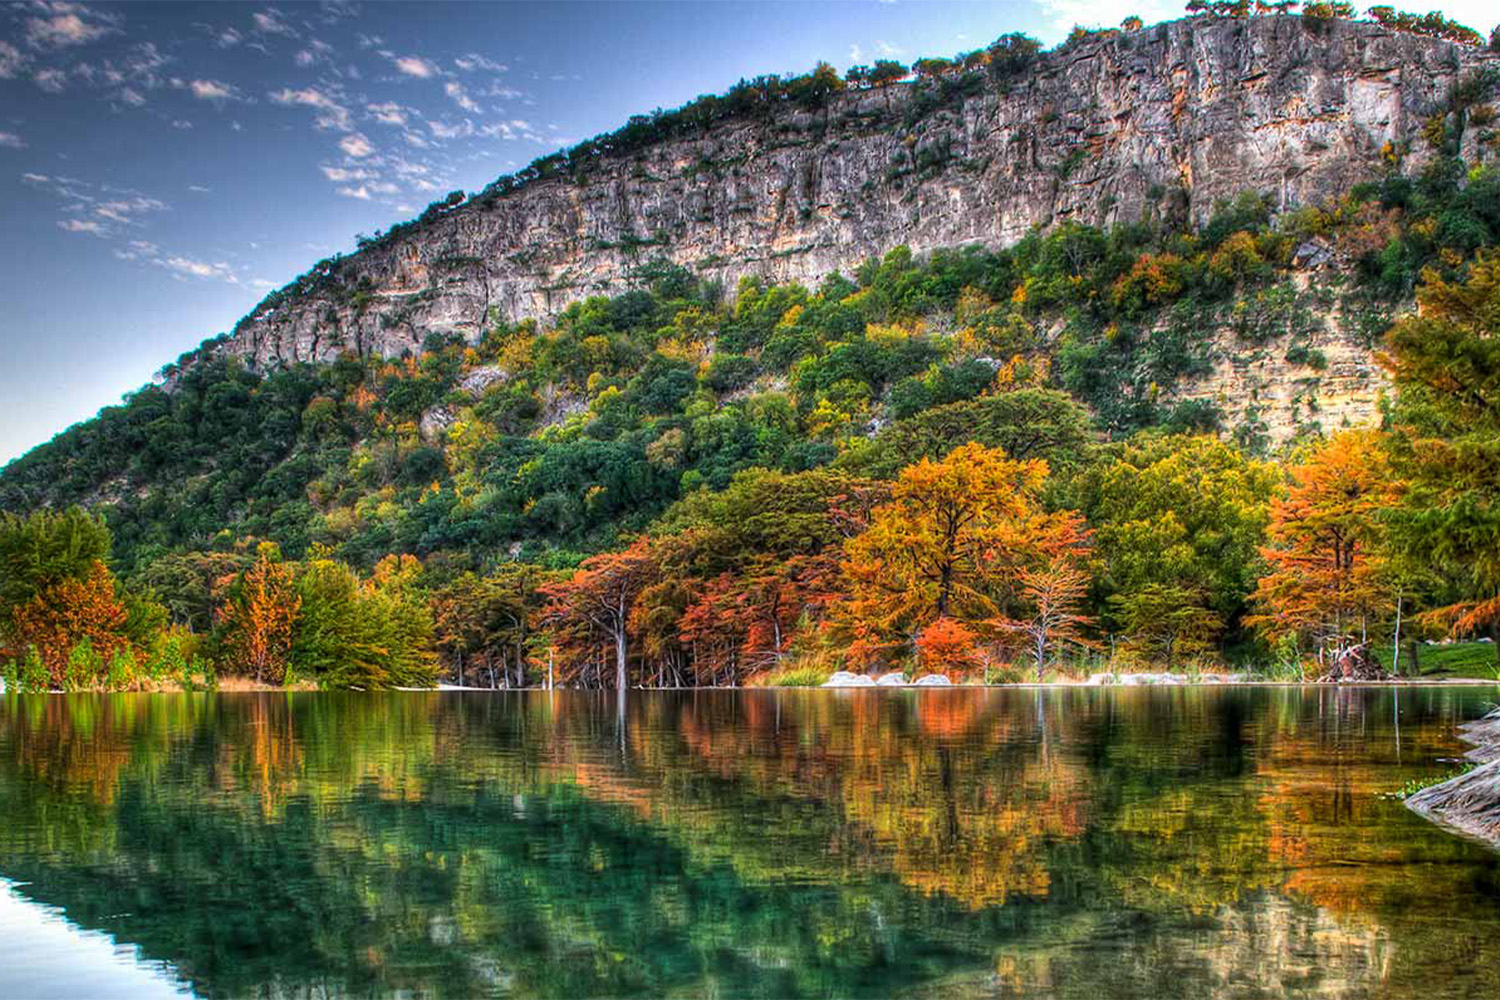 Trees changing covers in front of a mountain and reflecting in pond in front of them